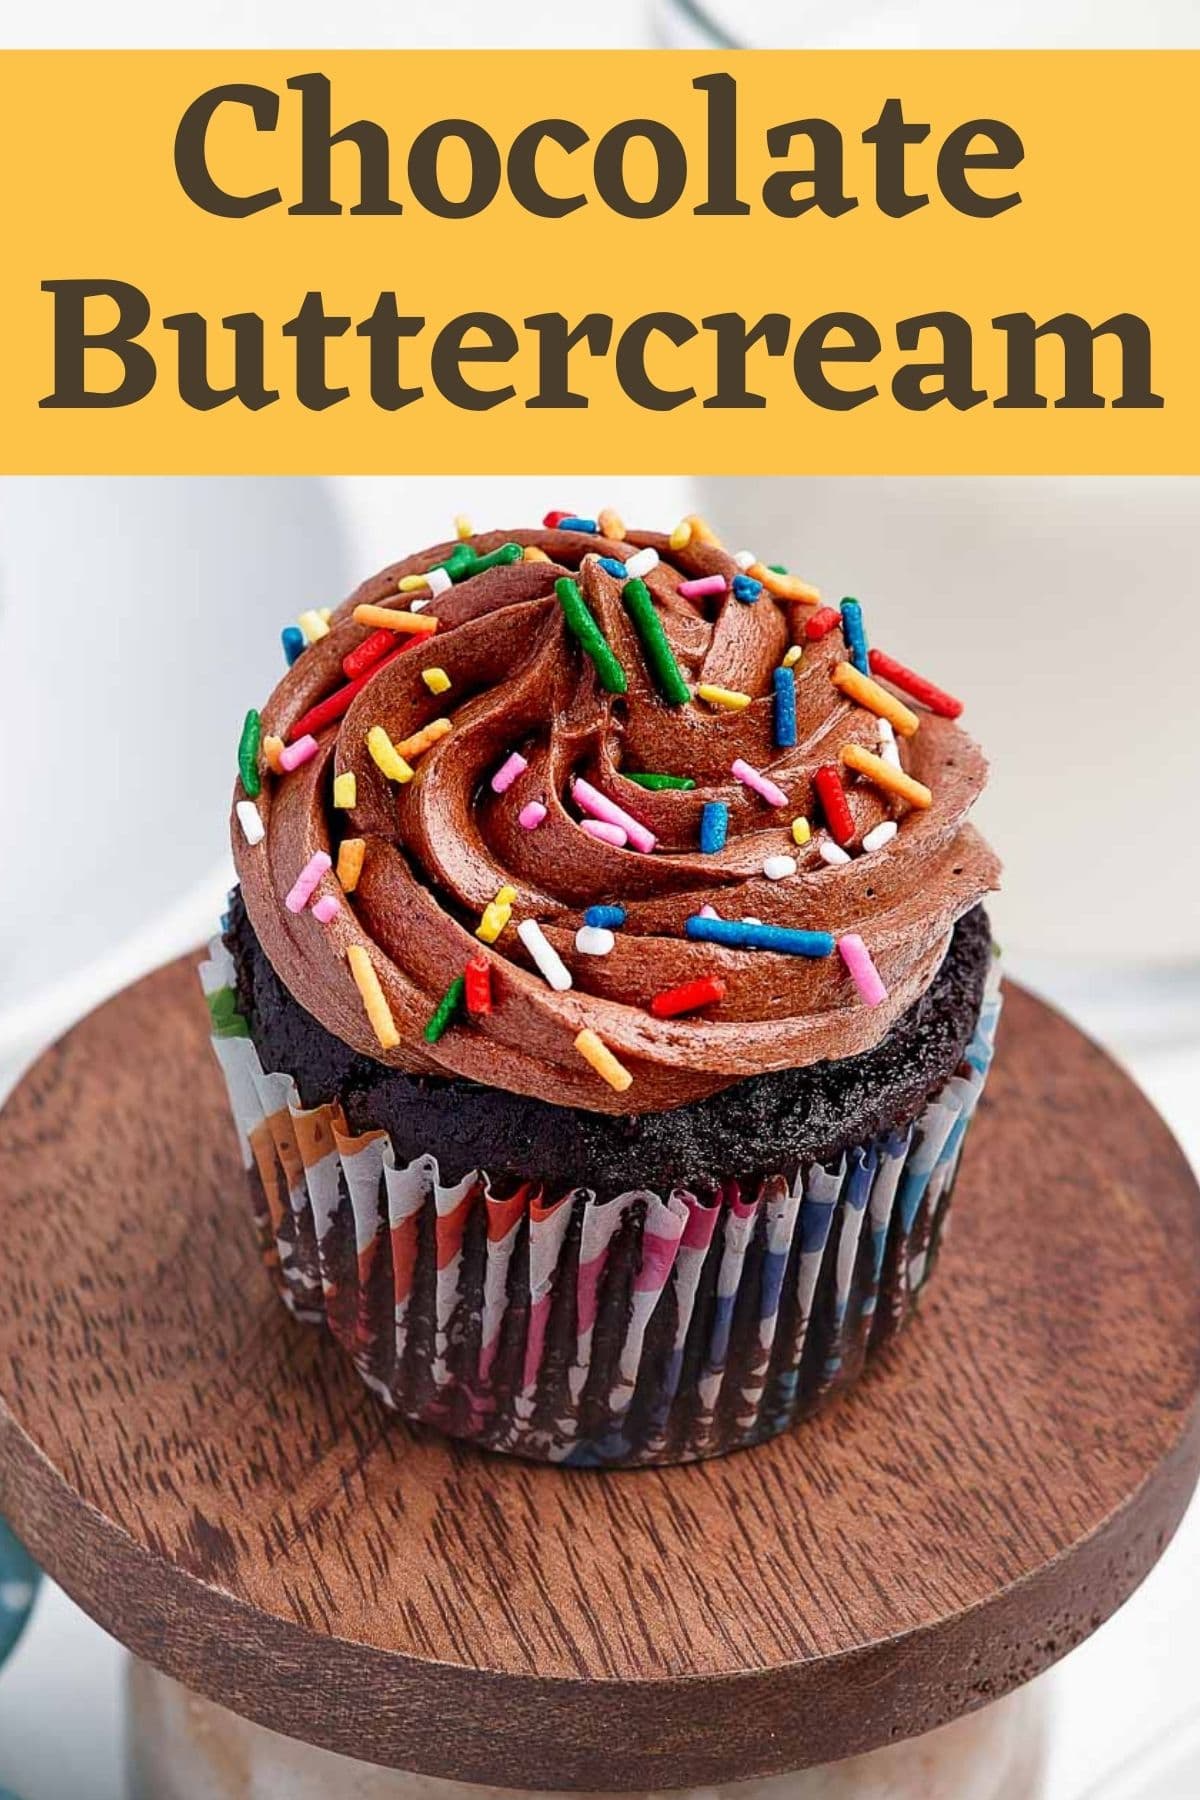 Perfect, fluffy chocolate buttercream made with cocoa powder. Great for cakes and cupcakes. So easy to make, and only 5 ingredients. It can be frozen, too.